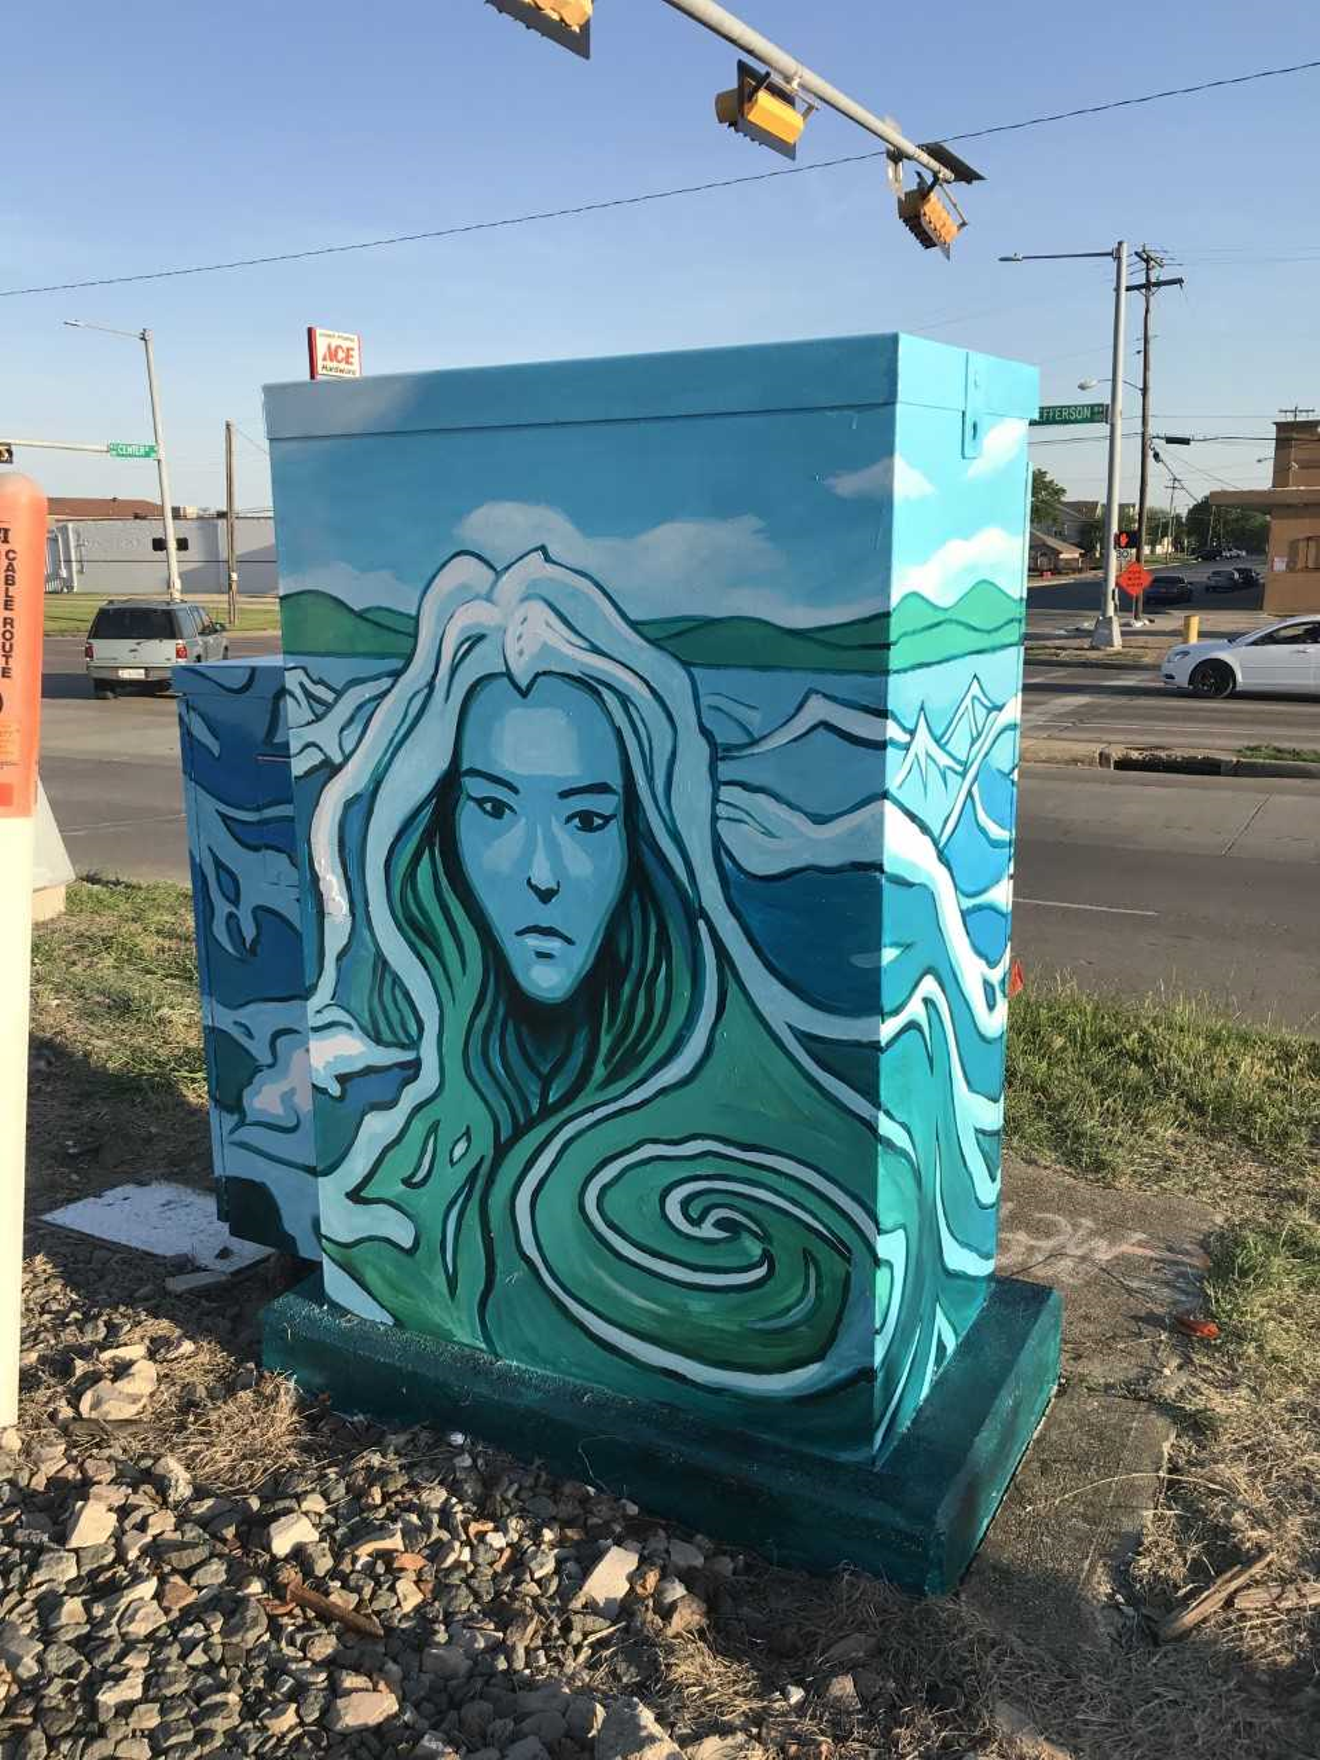 An example of art on a traffic signal box that can brighten up a city.